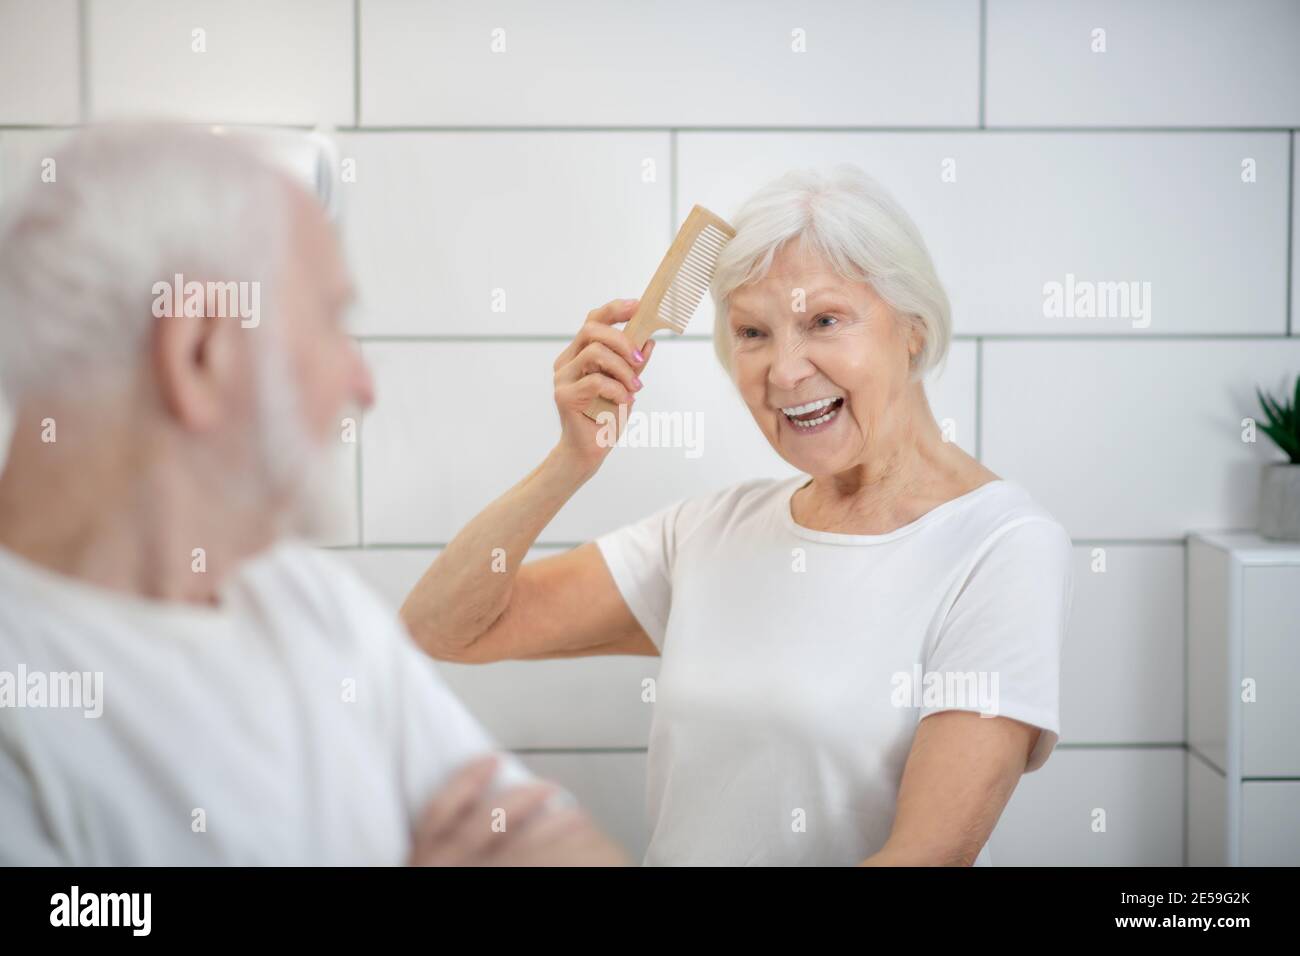 Elderly couple having their morning procedures together and looking happy Stock Photo